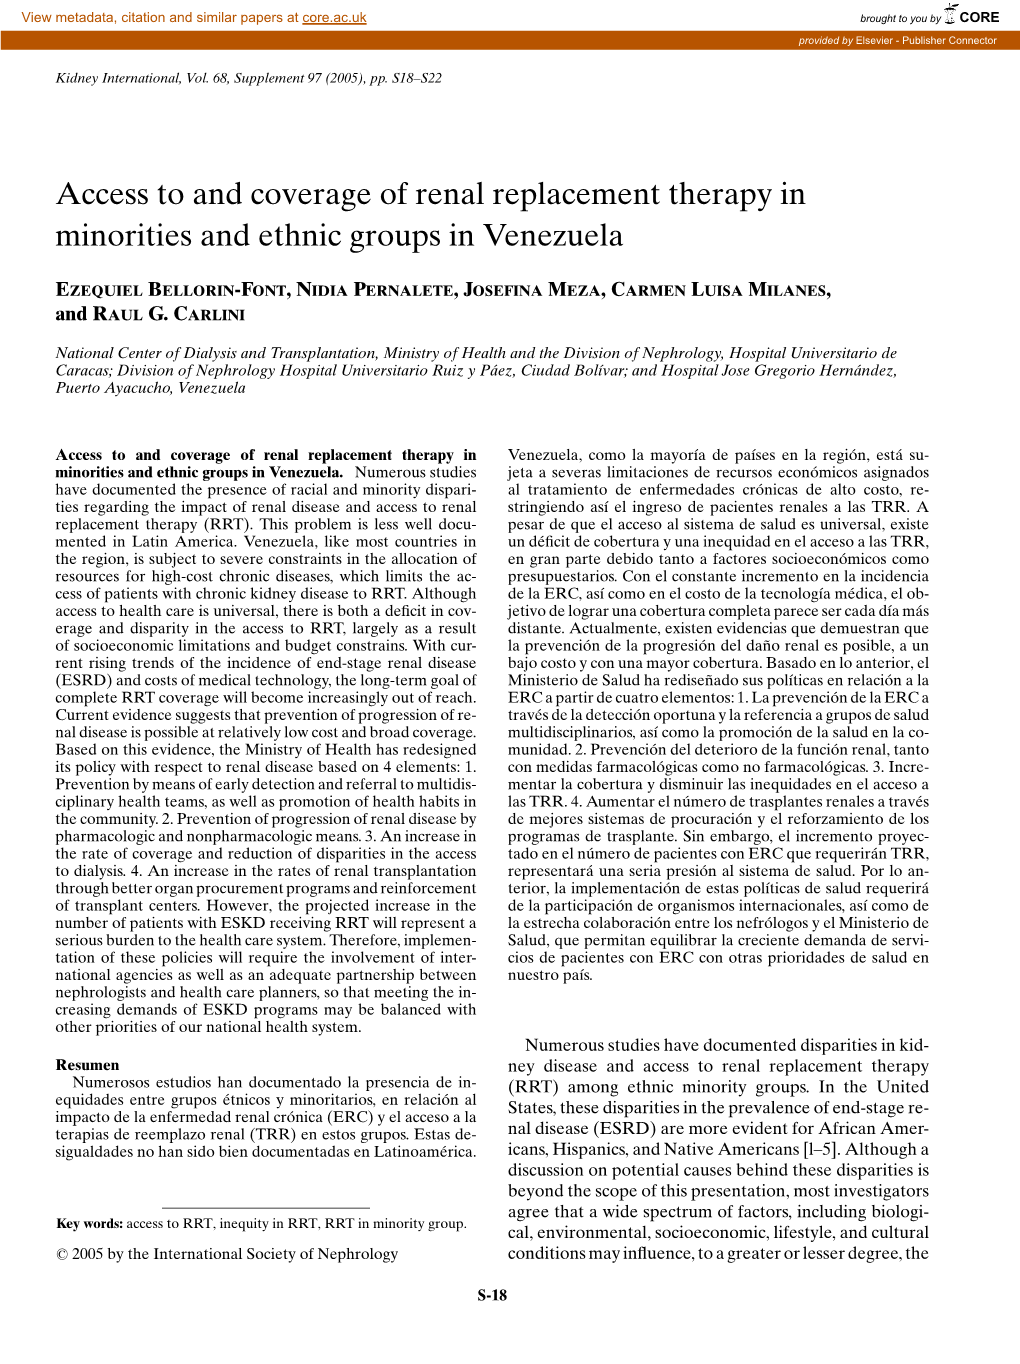 Access to and Coverage of Renal Replacement Therapy in Minorities and Ethnic Groups in Venezuela